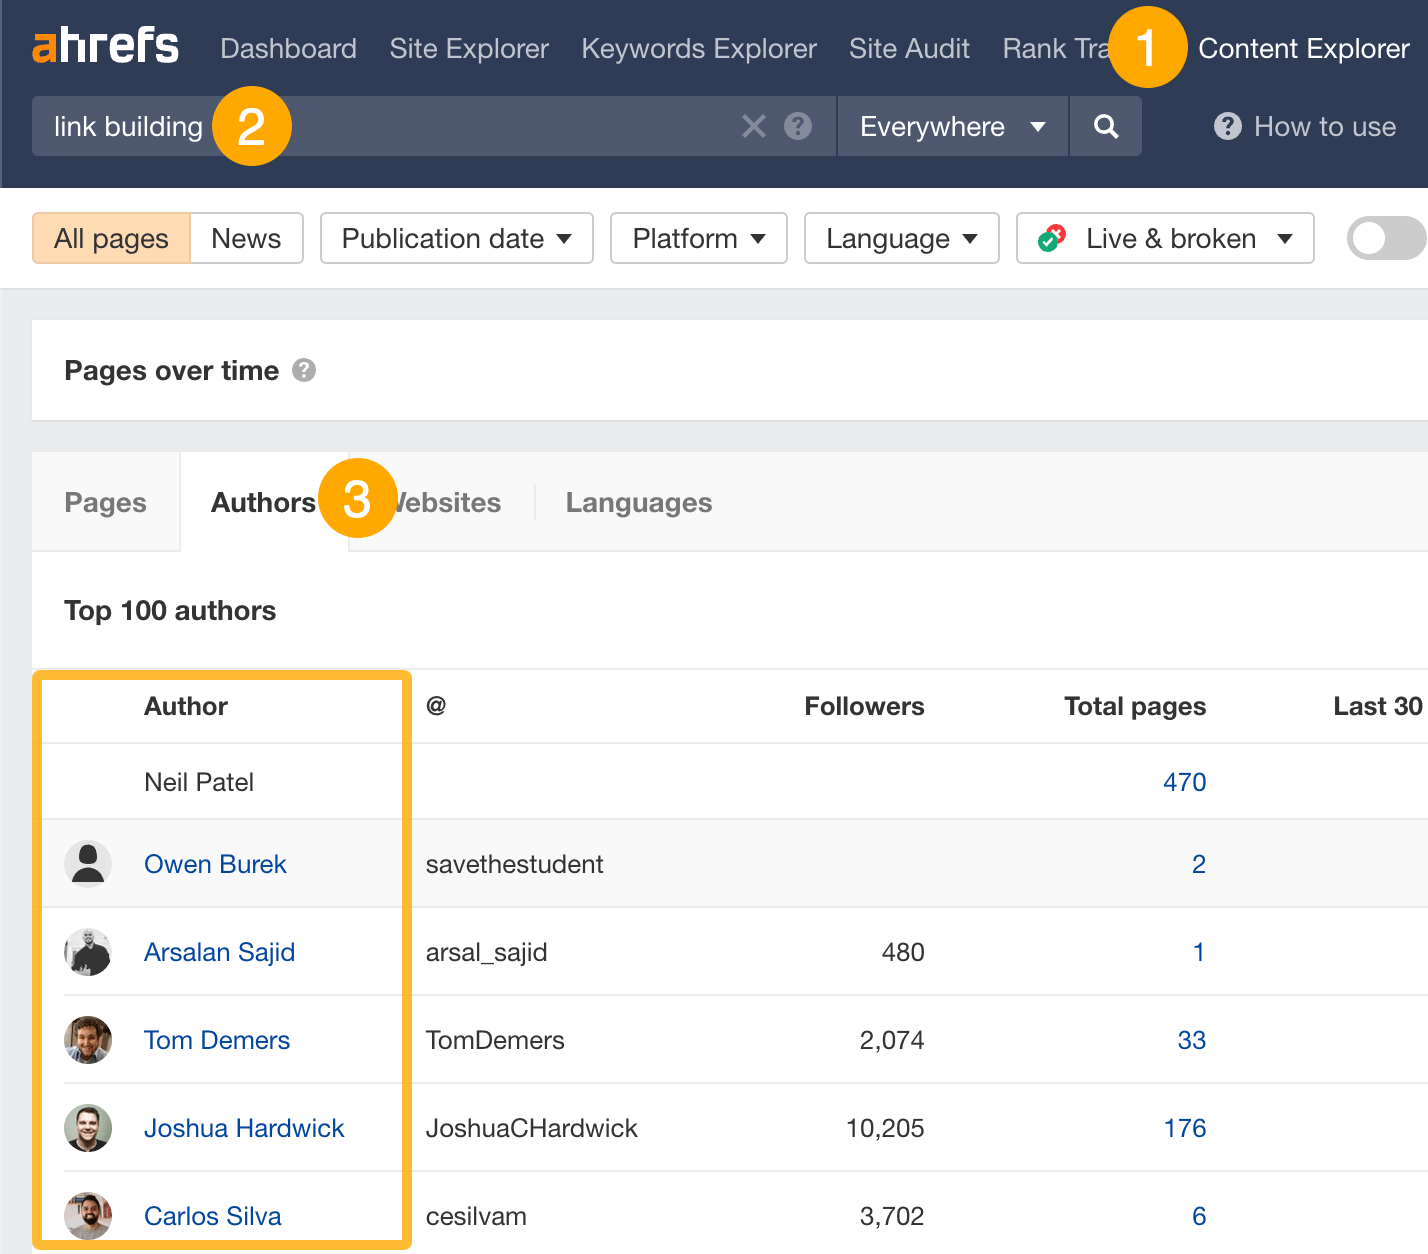 Finding people to reach out to, via Ahrefs' Content Explorer
